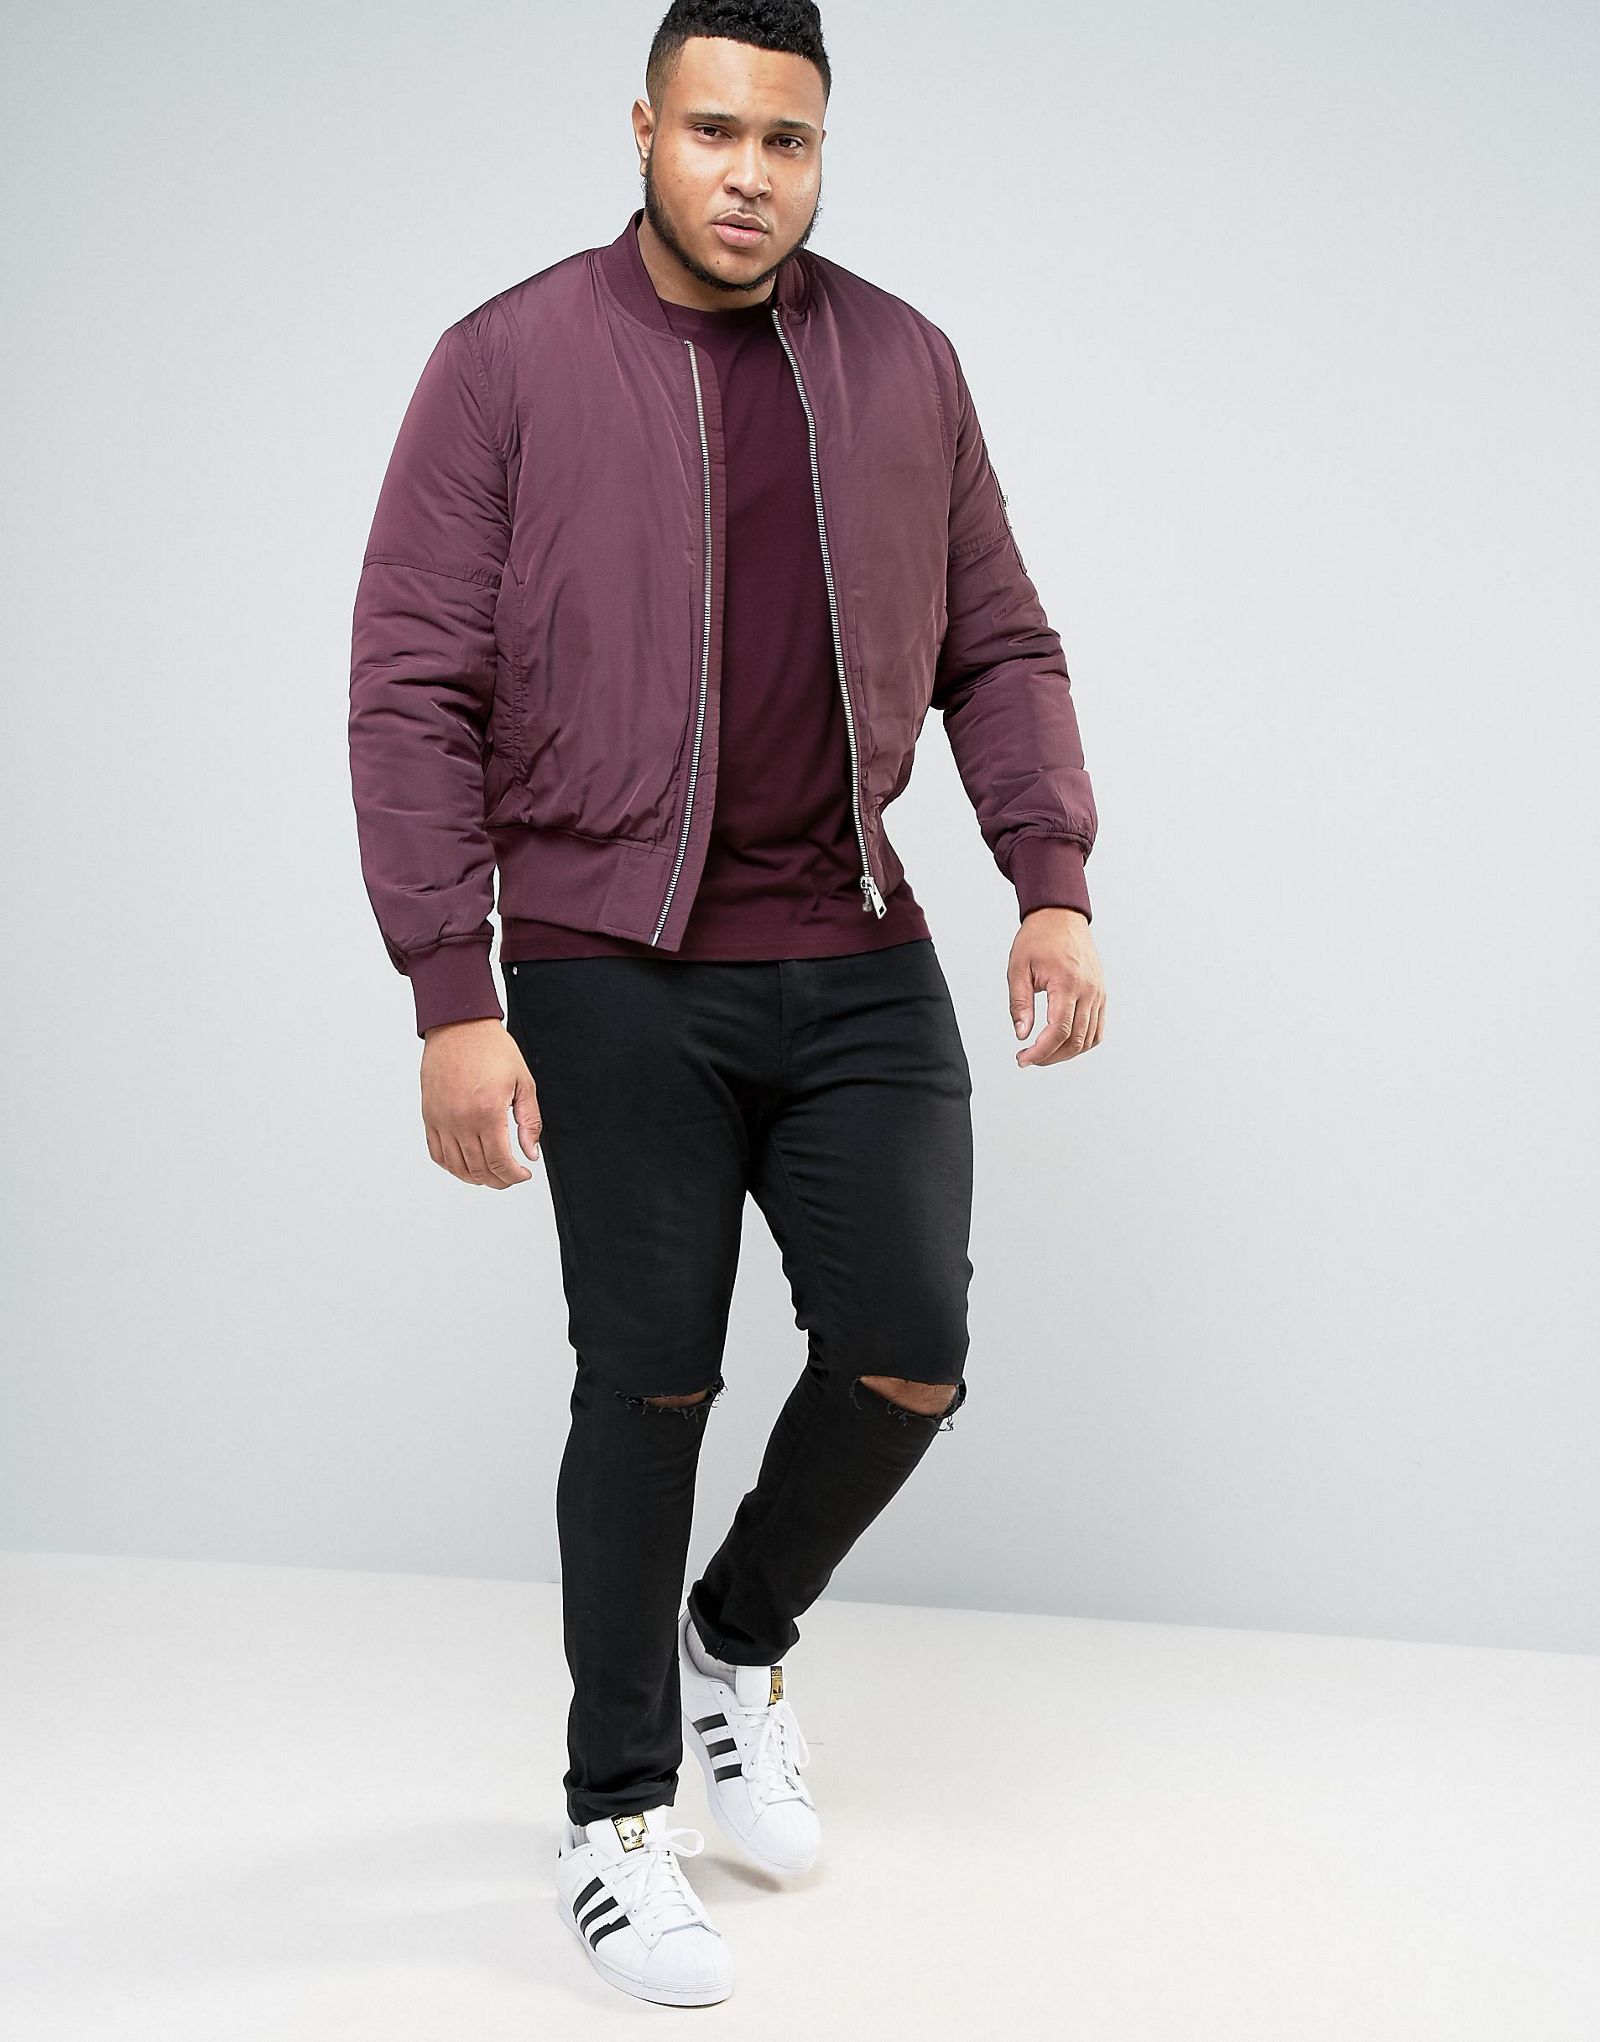 ASOS PLUS Muscle T-Shirt In Oxblood